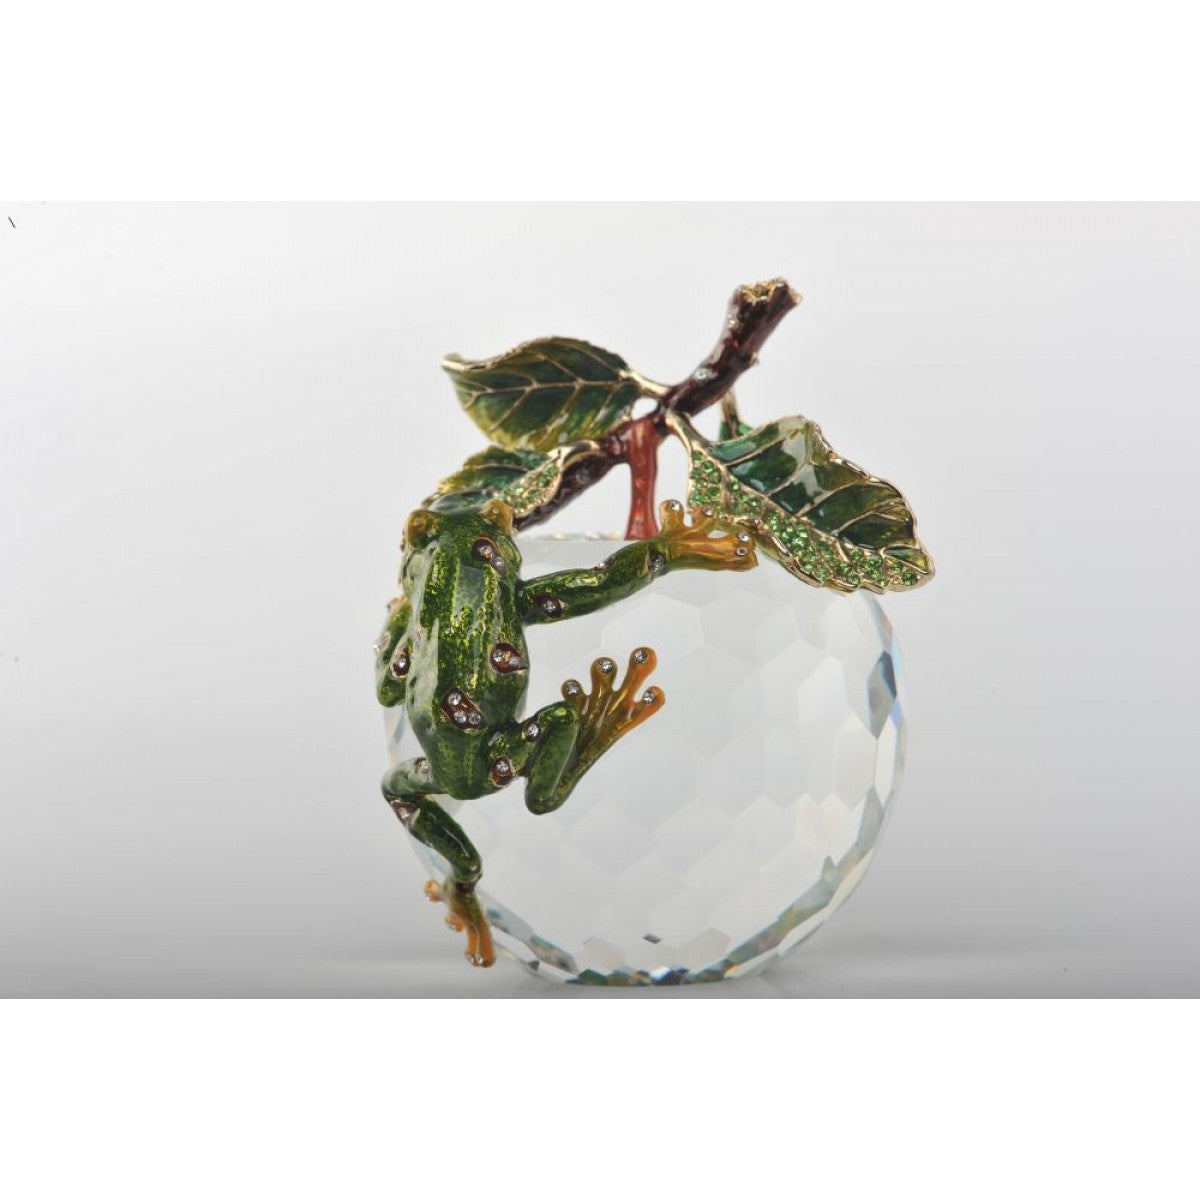 Crystal Apple with a Green Frog by Keren Kopal